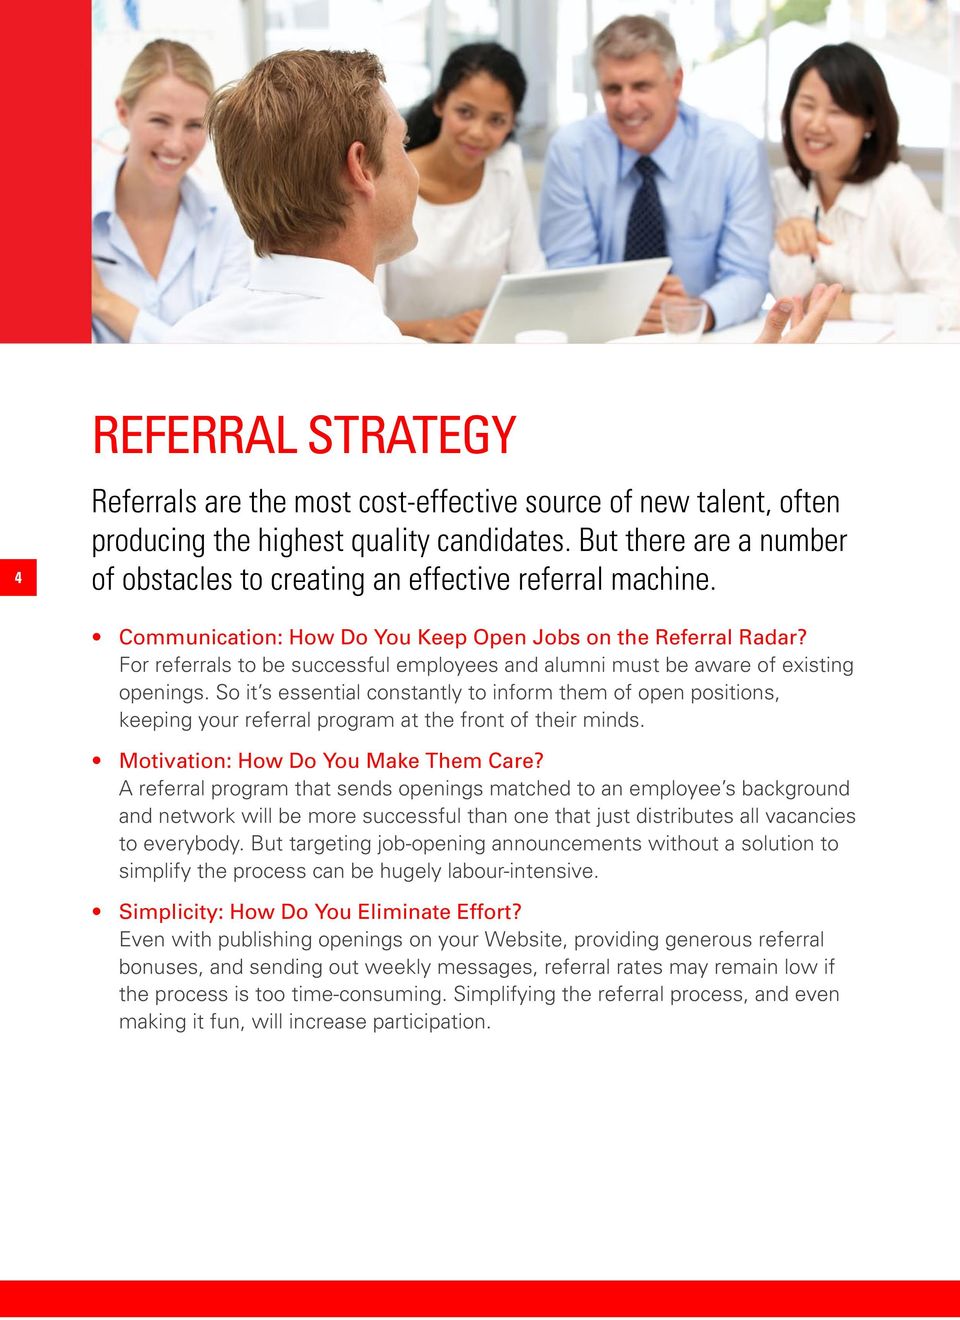 For referrals to be successful employees and alumni must be aware of existing openings.